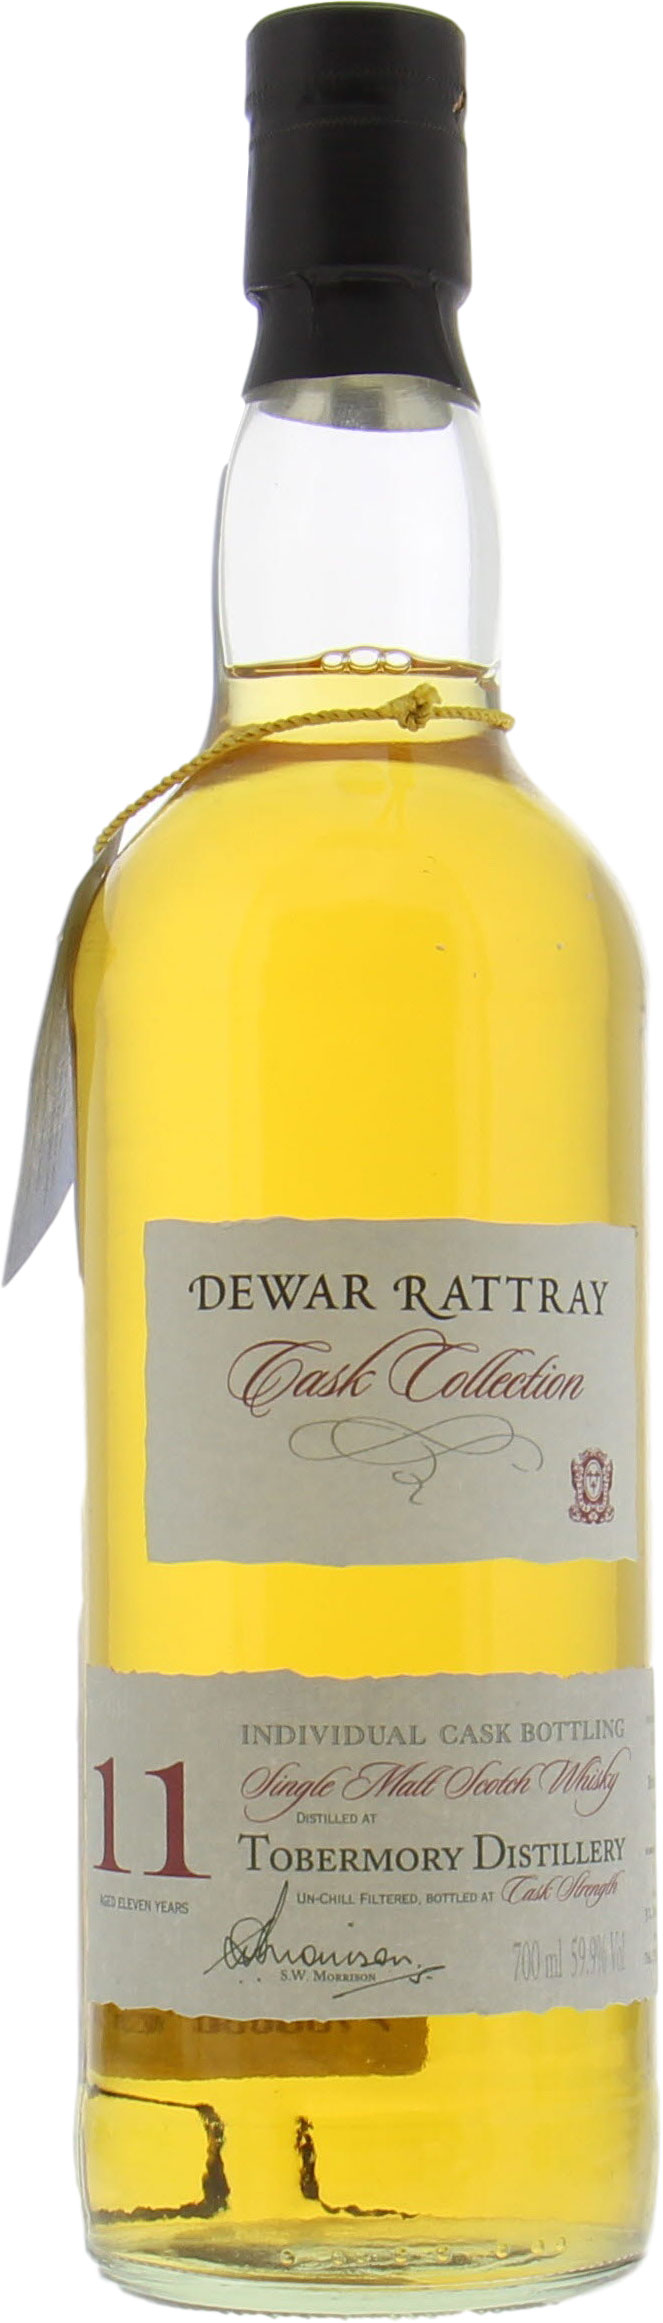 Tobermory - 11 Years Old Dewar Rattray Cask 1161 59.9% 1996 NO ORIGINAL TUBE INCLUDED!